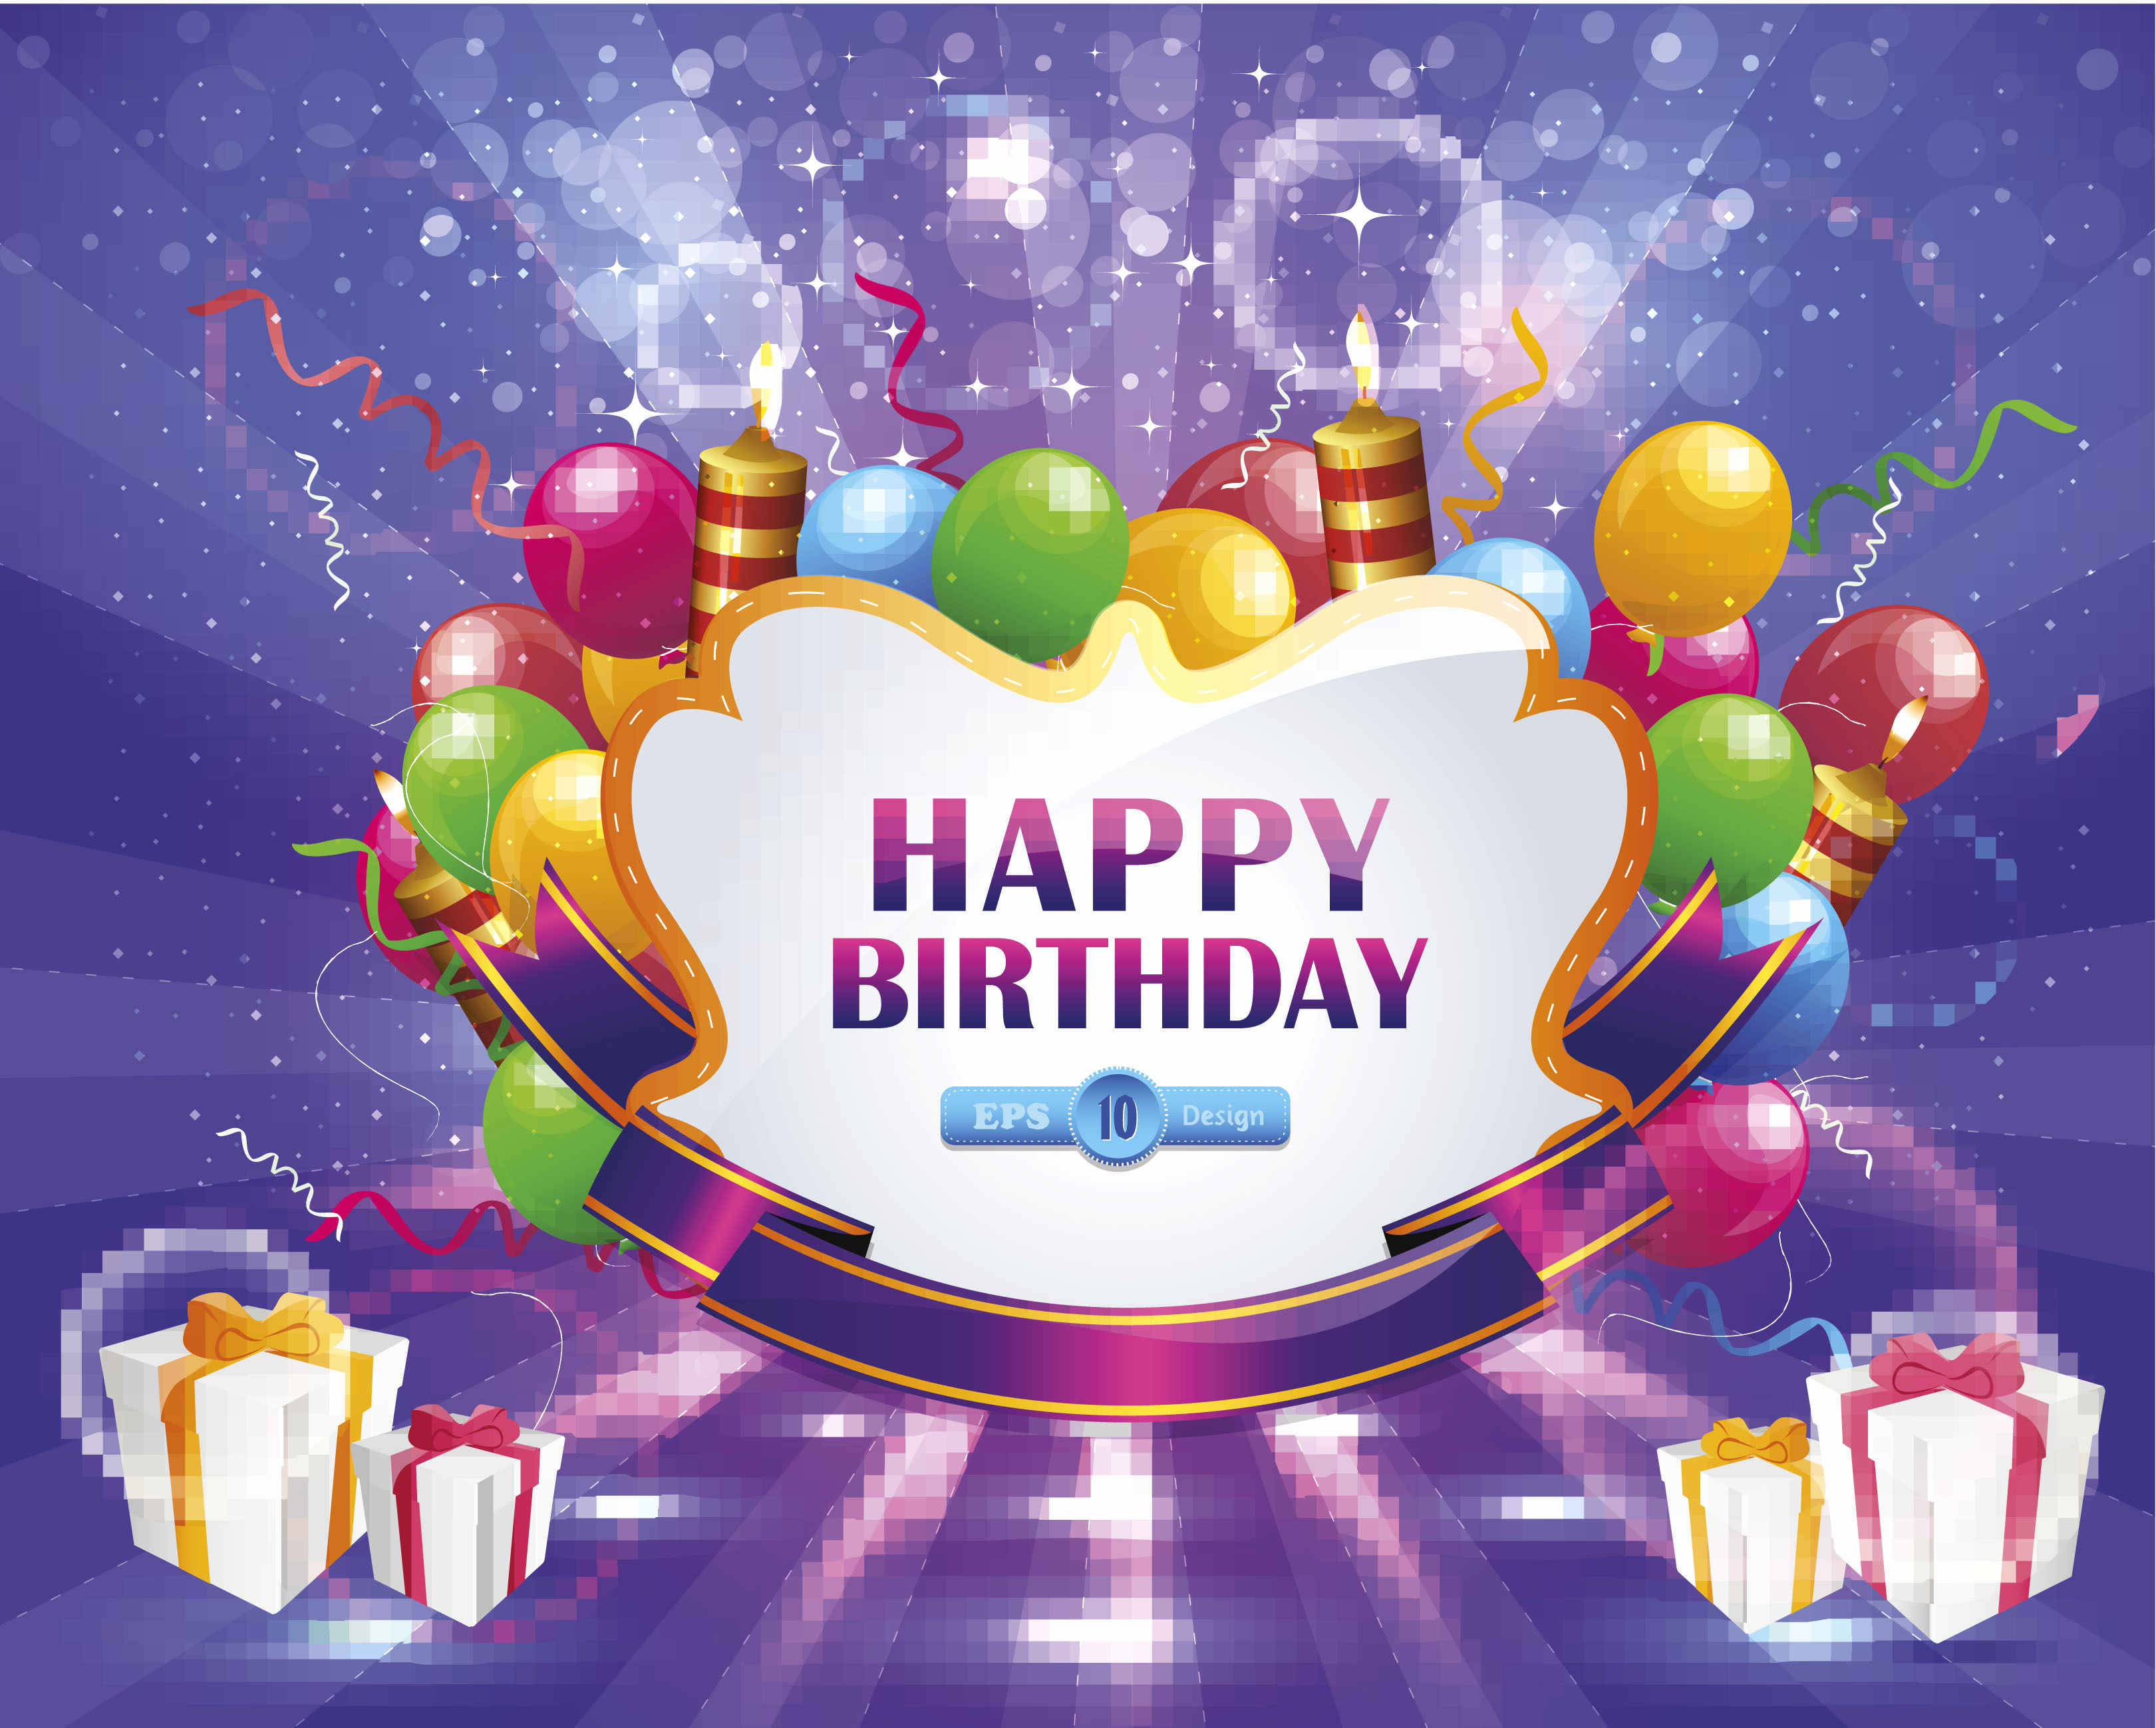 Happy Birthday Pictures Free New Beautiful Picture with Congratulations for Birthday